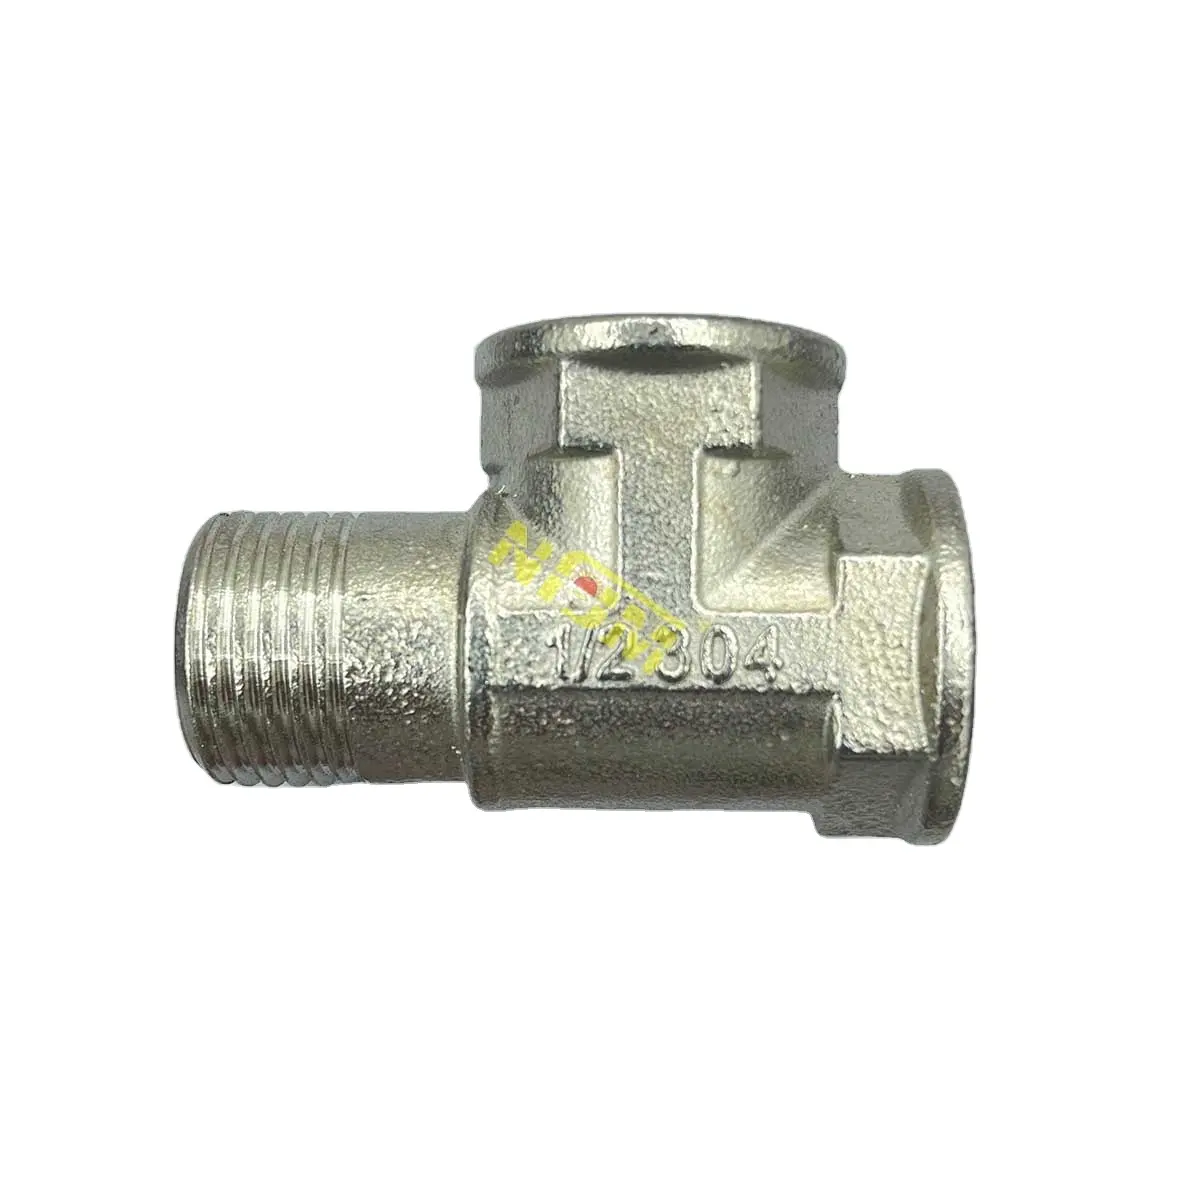 NFJM Whole Fittings Male Female T Shaped Nipple Stainless Steel 304 Threaded T Pipe Fitting